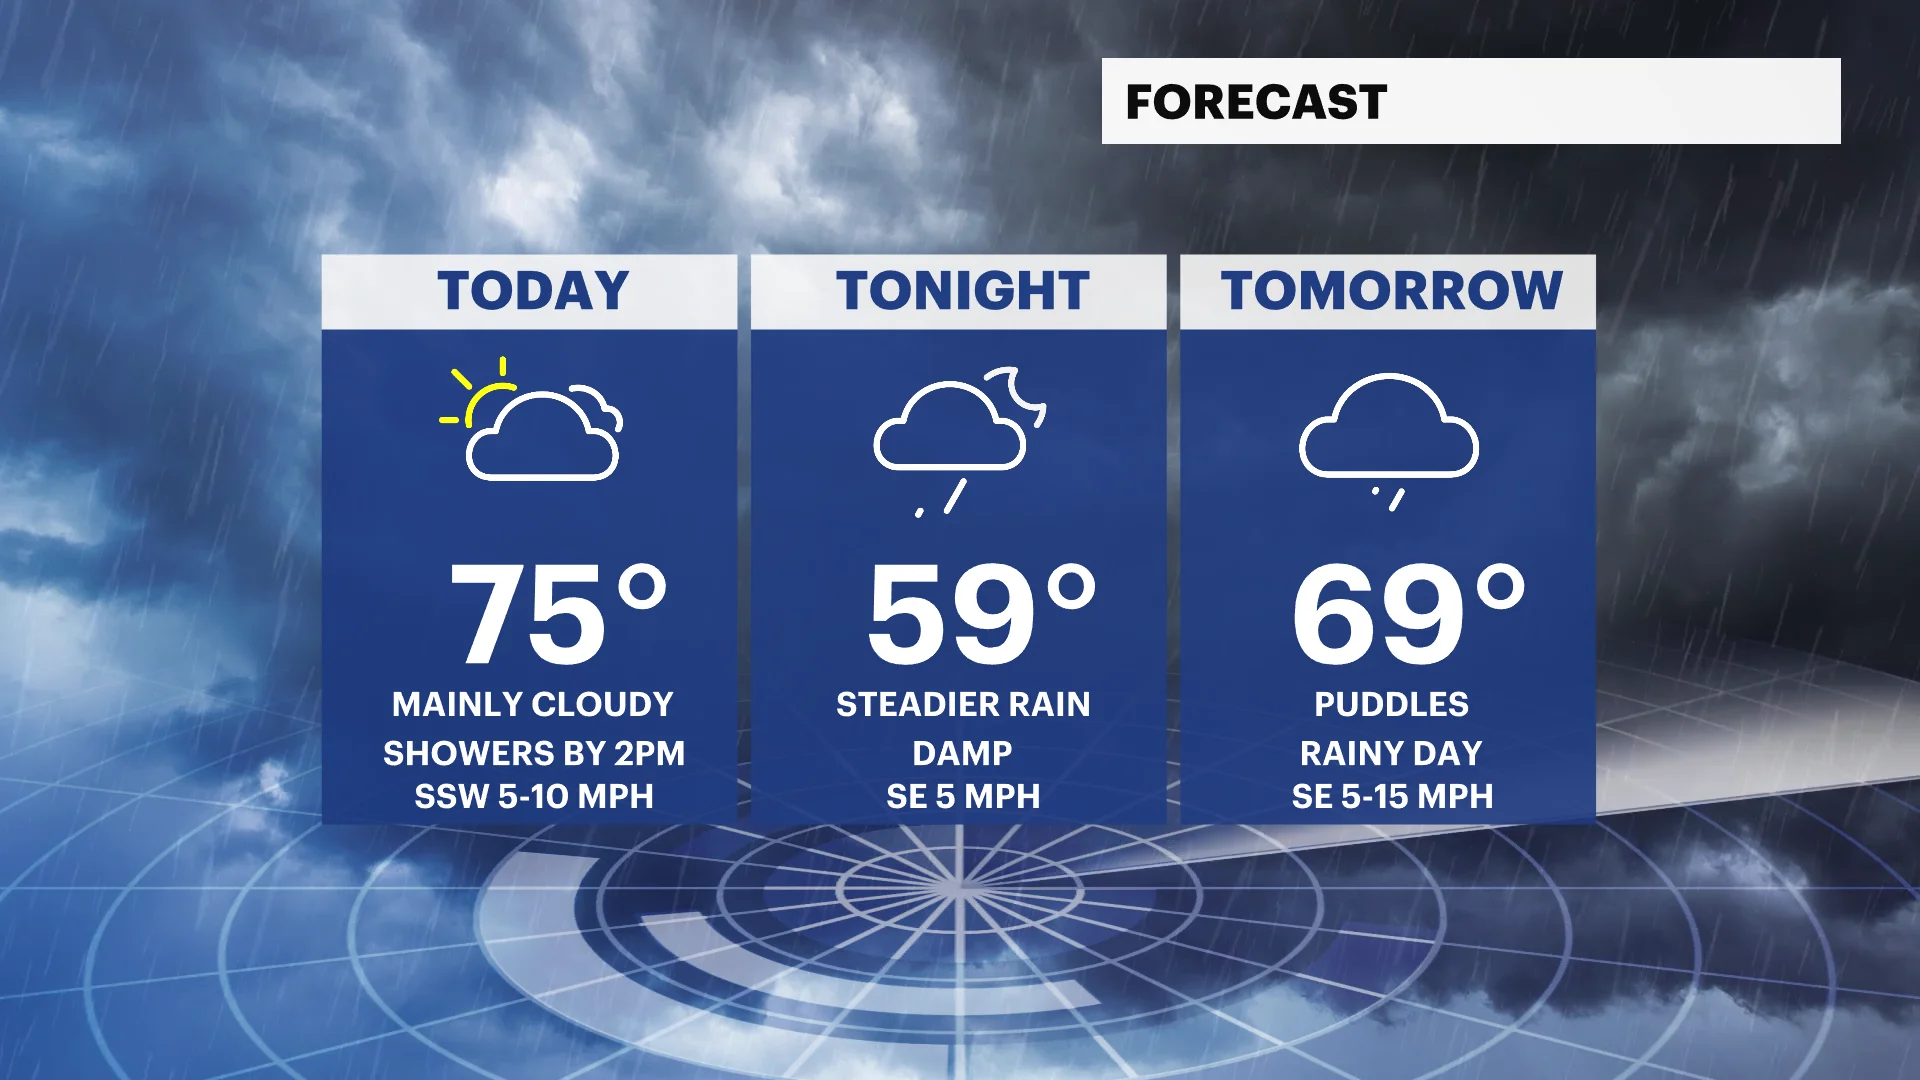 STORM WATCH: Mix of sun and clouds before midday rain showers arrive in New Jersey